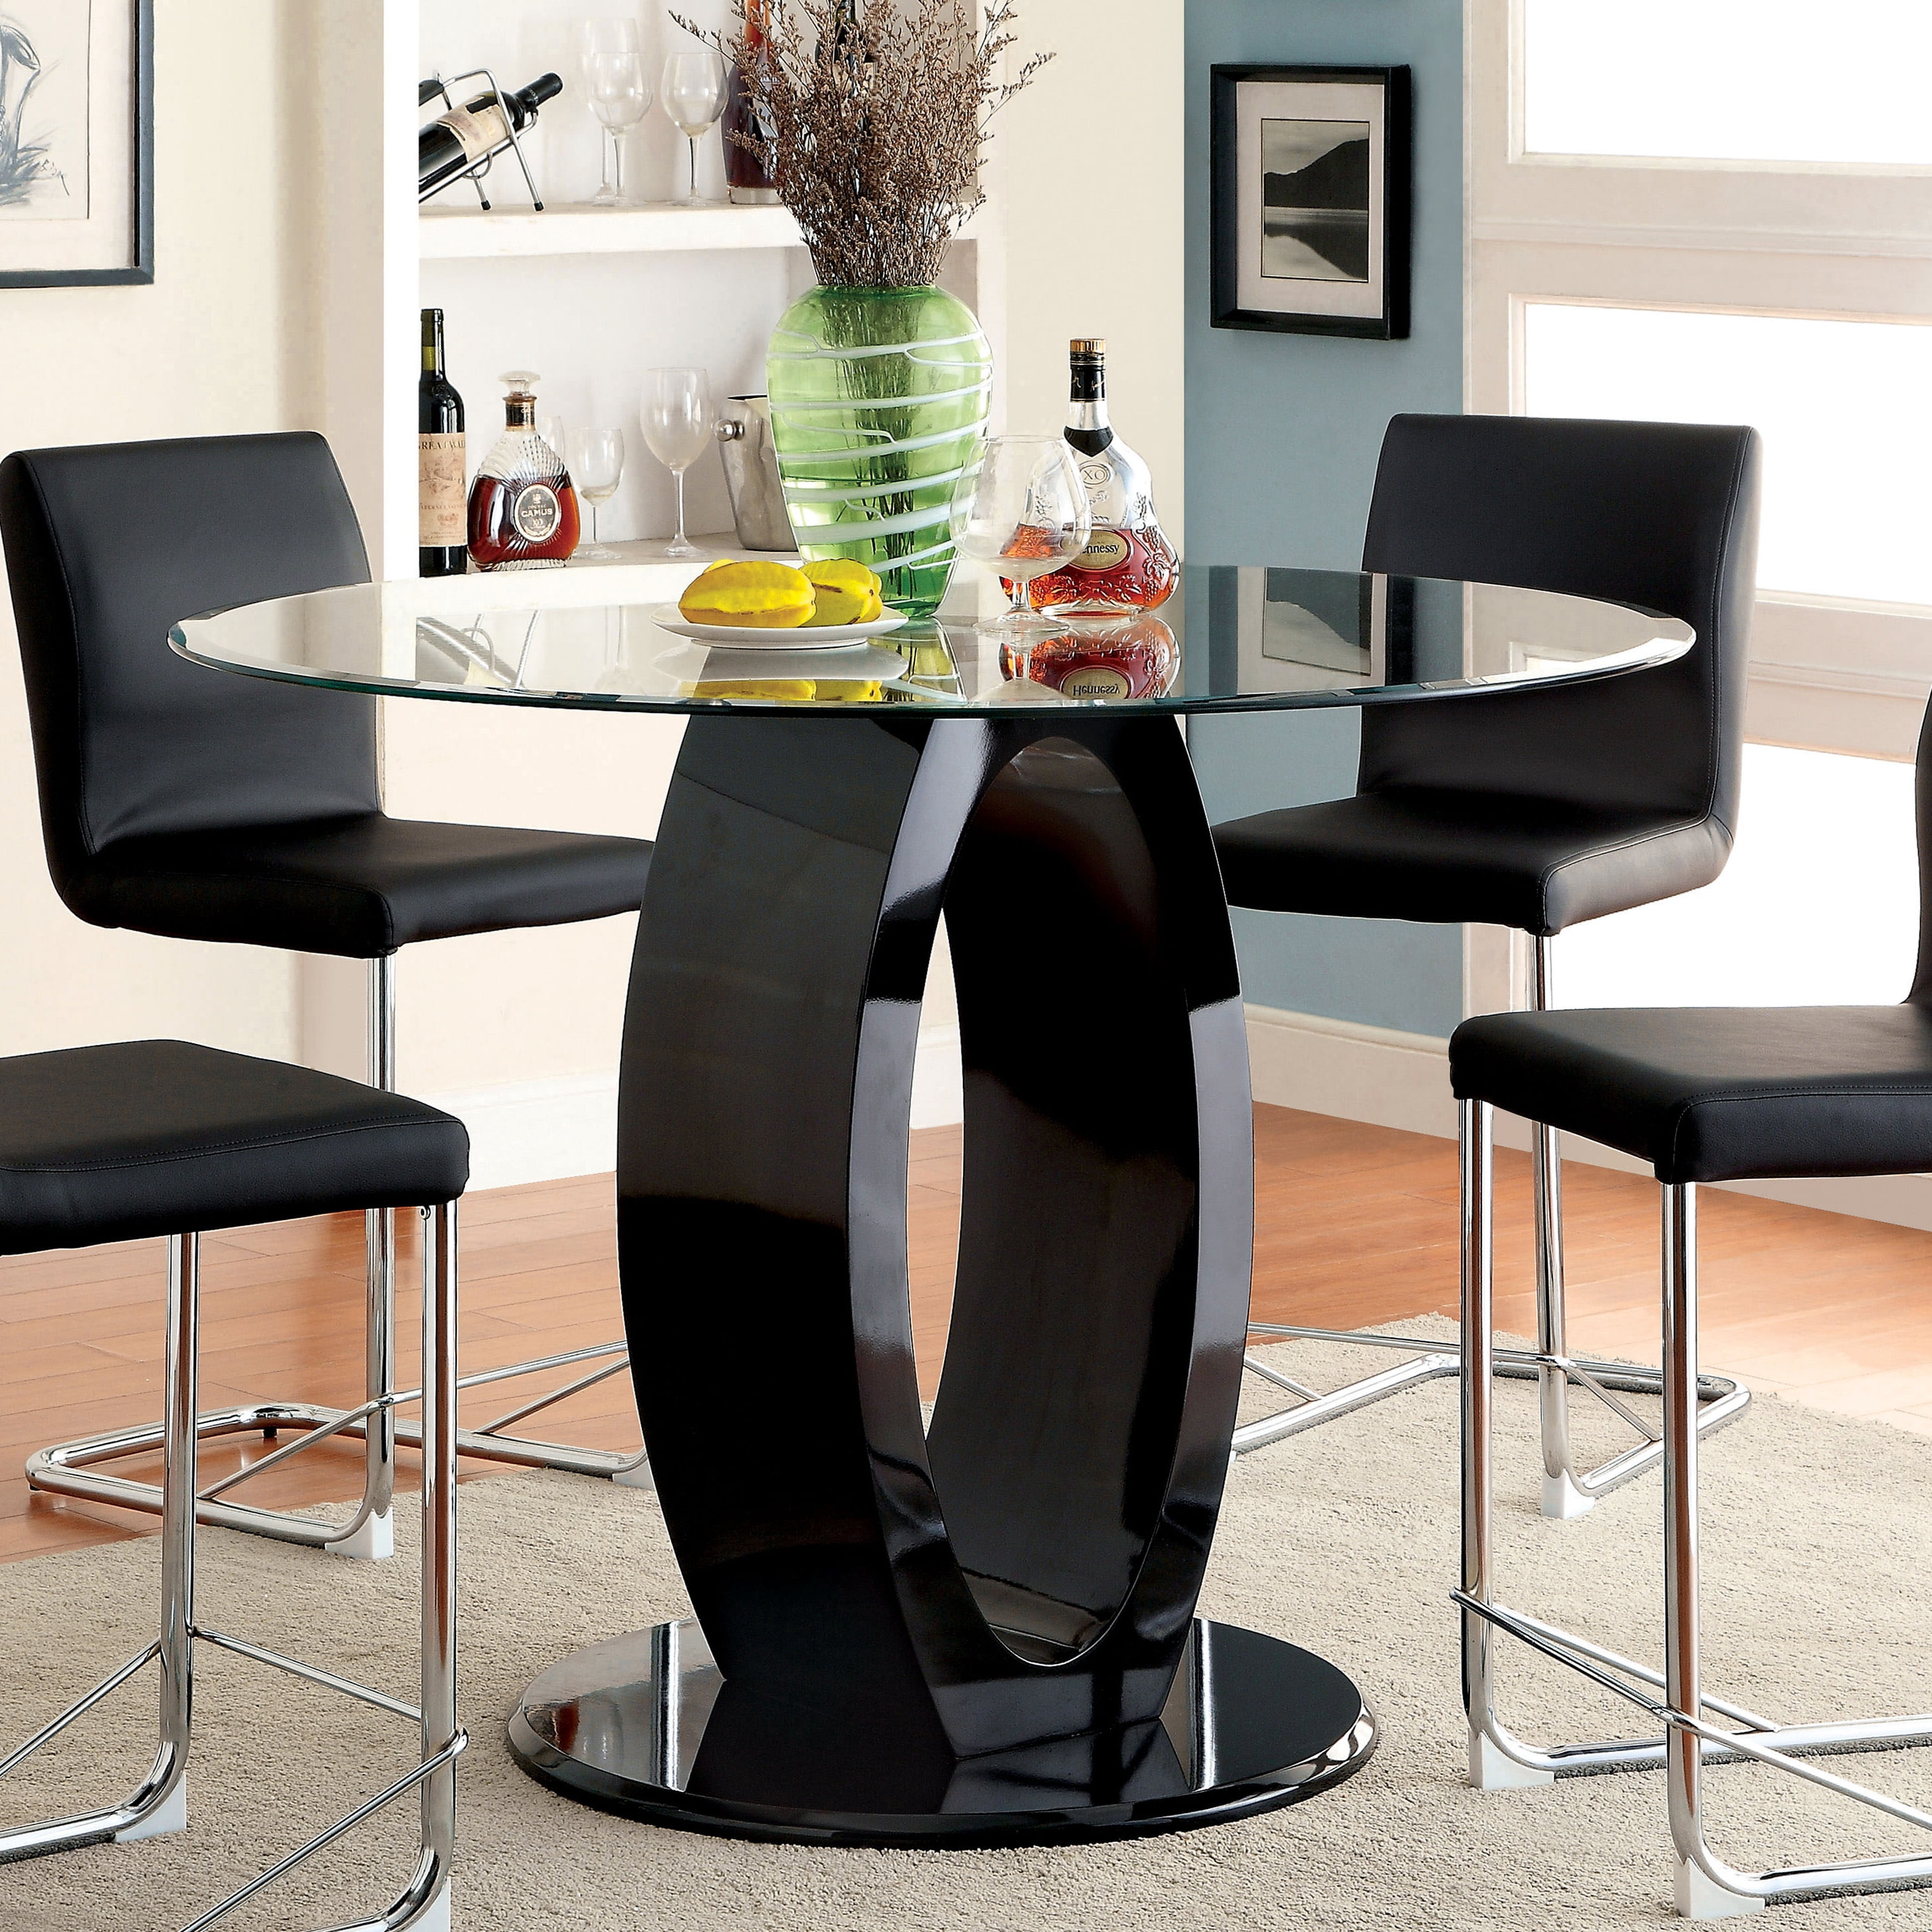 Furniture of America Janus Round Glass Top Counter Dining Table, Black ...